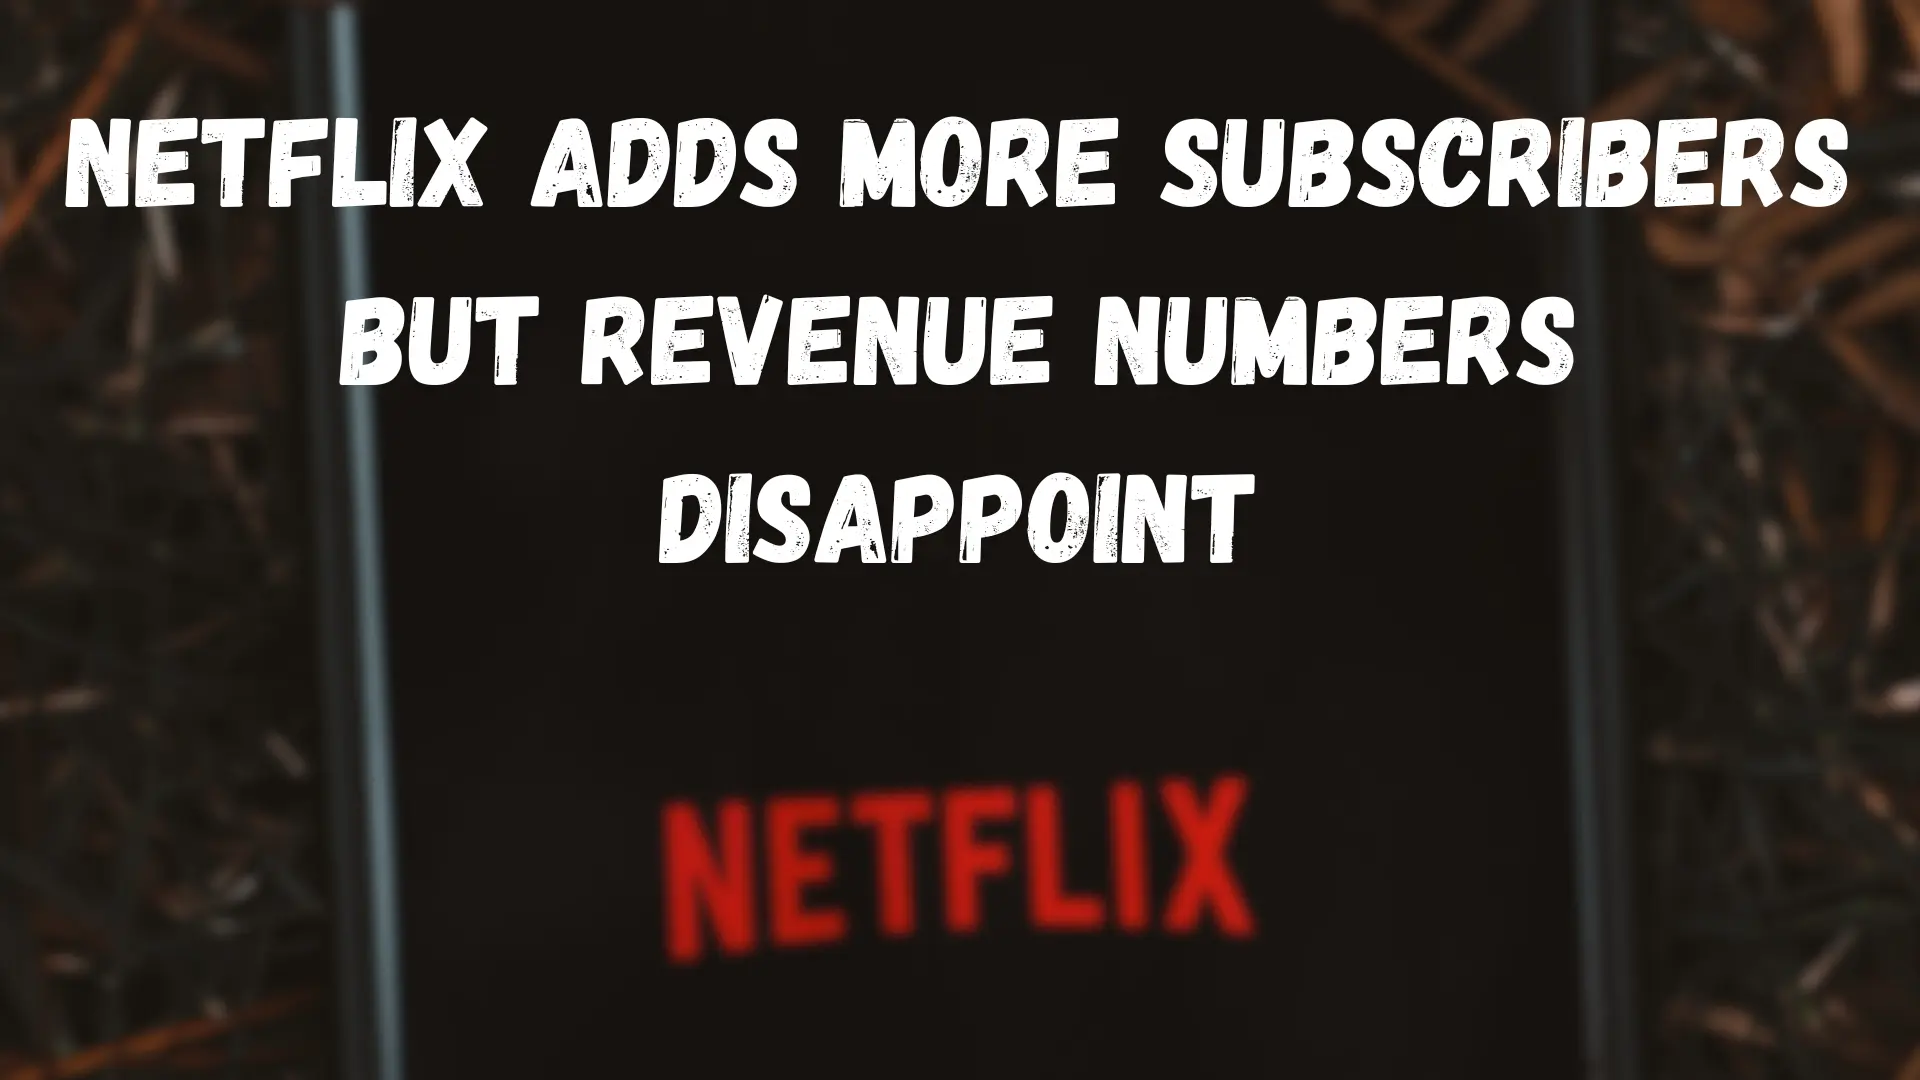 Netflix Adds More Subscribers but Revenue Numbers Disappoint